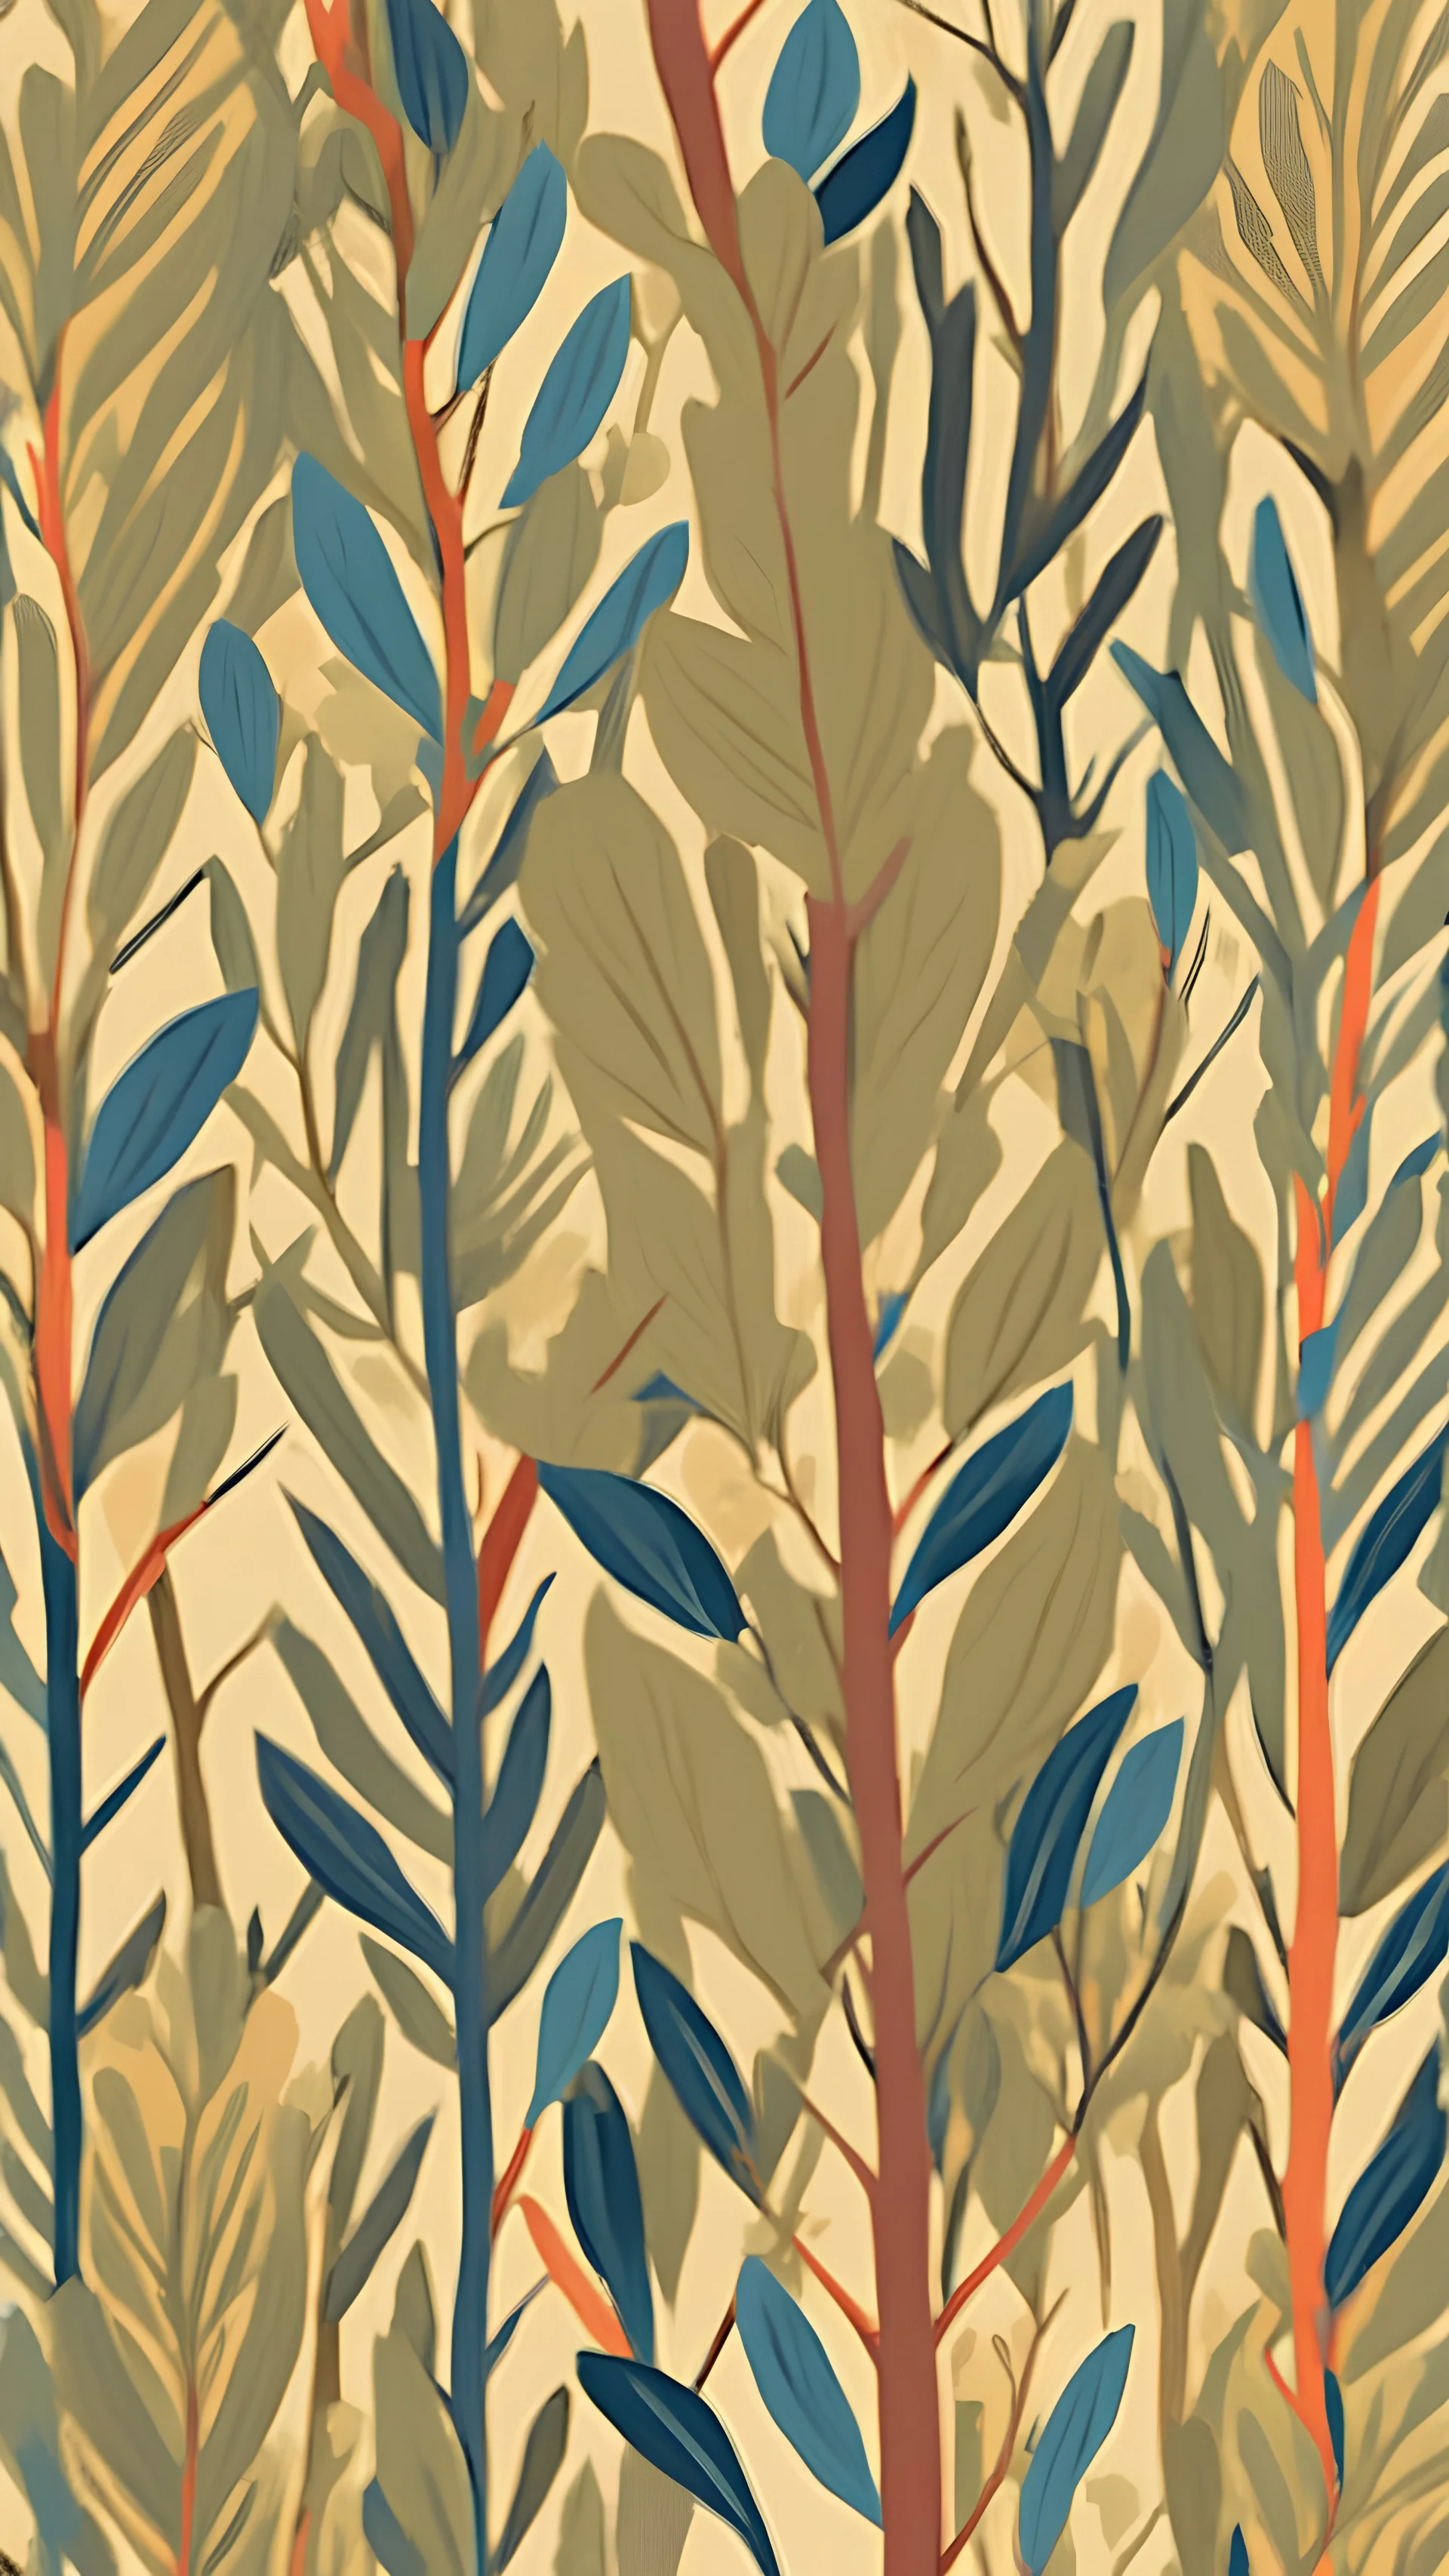 willow branches, woods, 2d, vector style, flat vector style, flat colors , floral pattern, repeat, wallpaper, art nouveau in Gouache Style, Watercolor, Museum Epic Impressionist Maximalist Masterpiece, Thick Brush Strokes, Impasto Gouache, thick layers of gouache watercolors textured on Canvas, 8k Resolution, Matte Painting kintsugi poster art